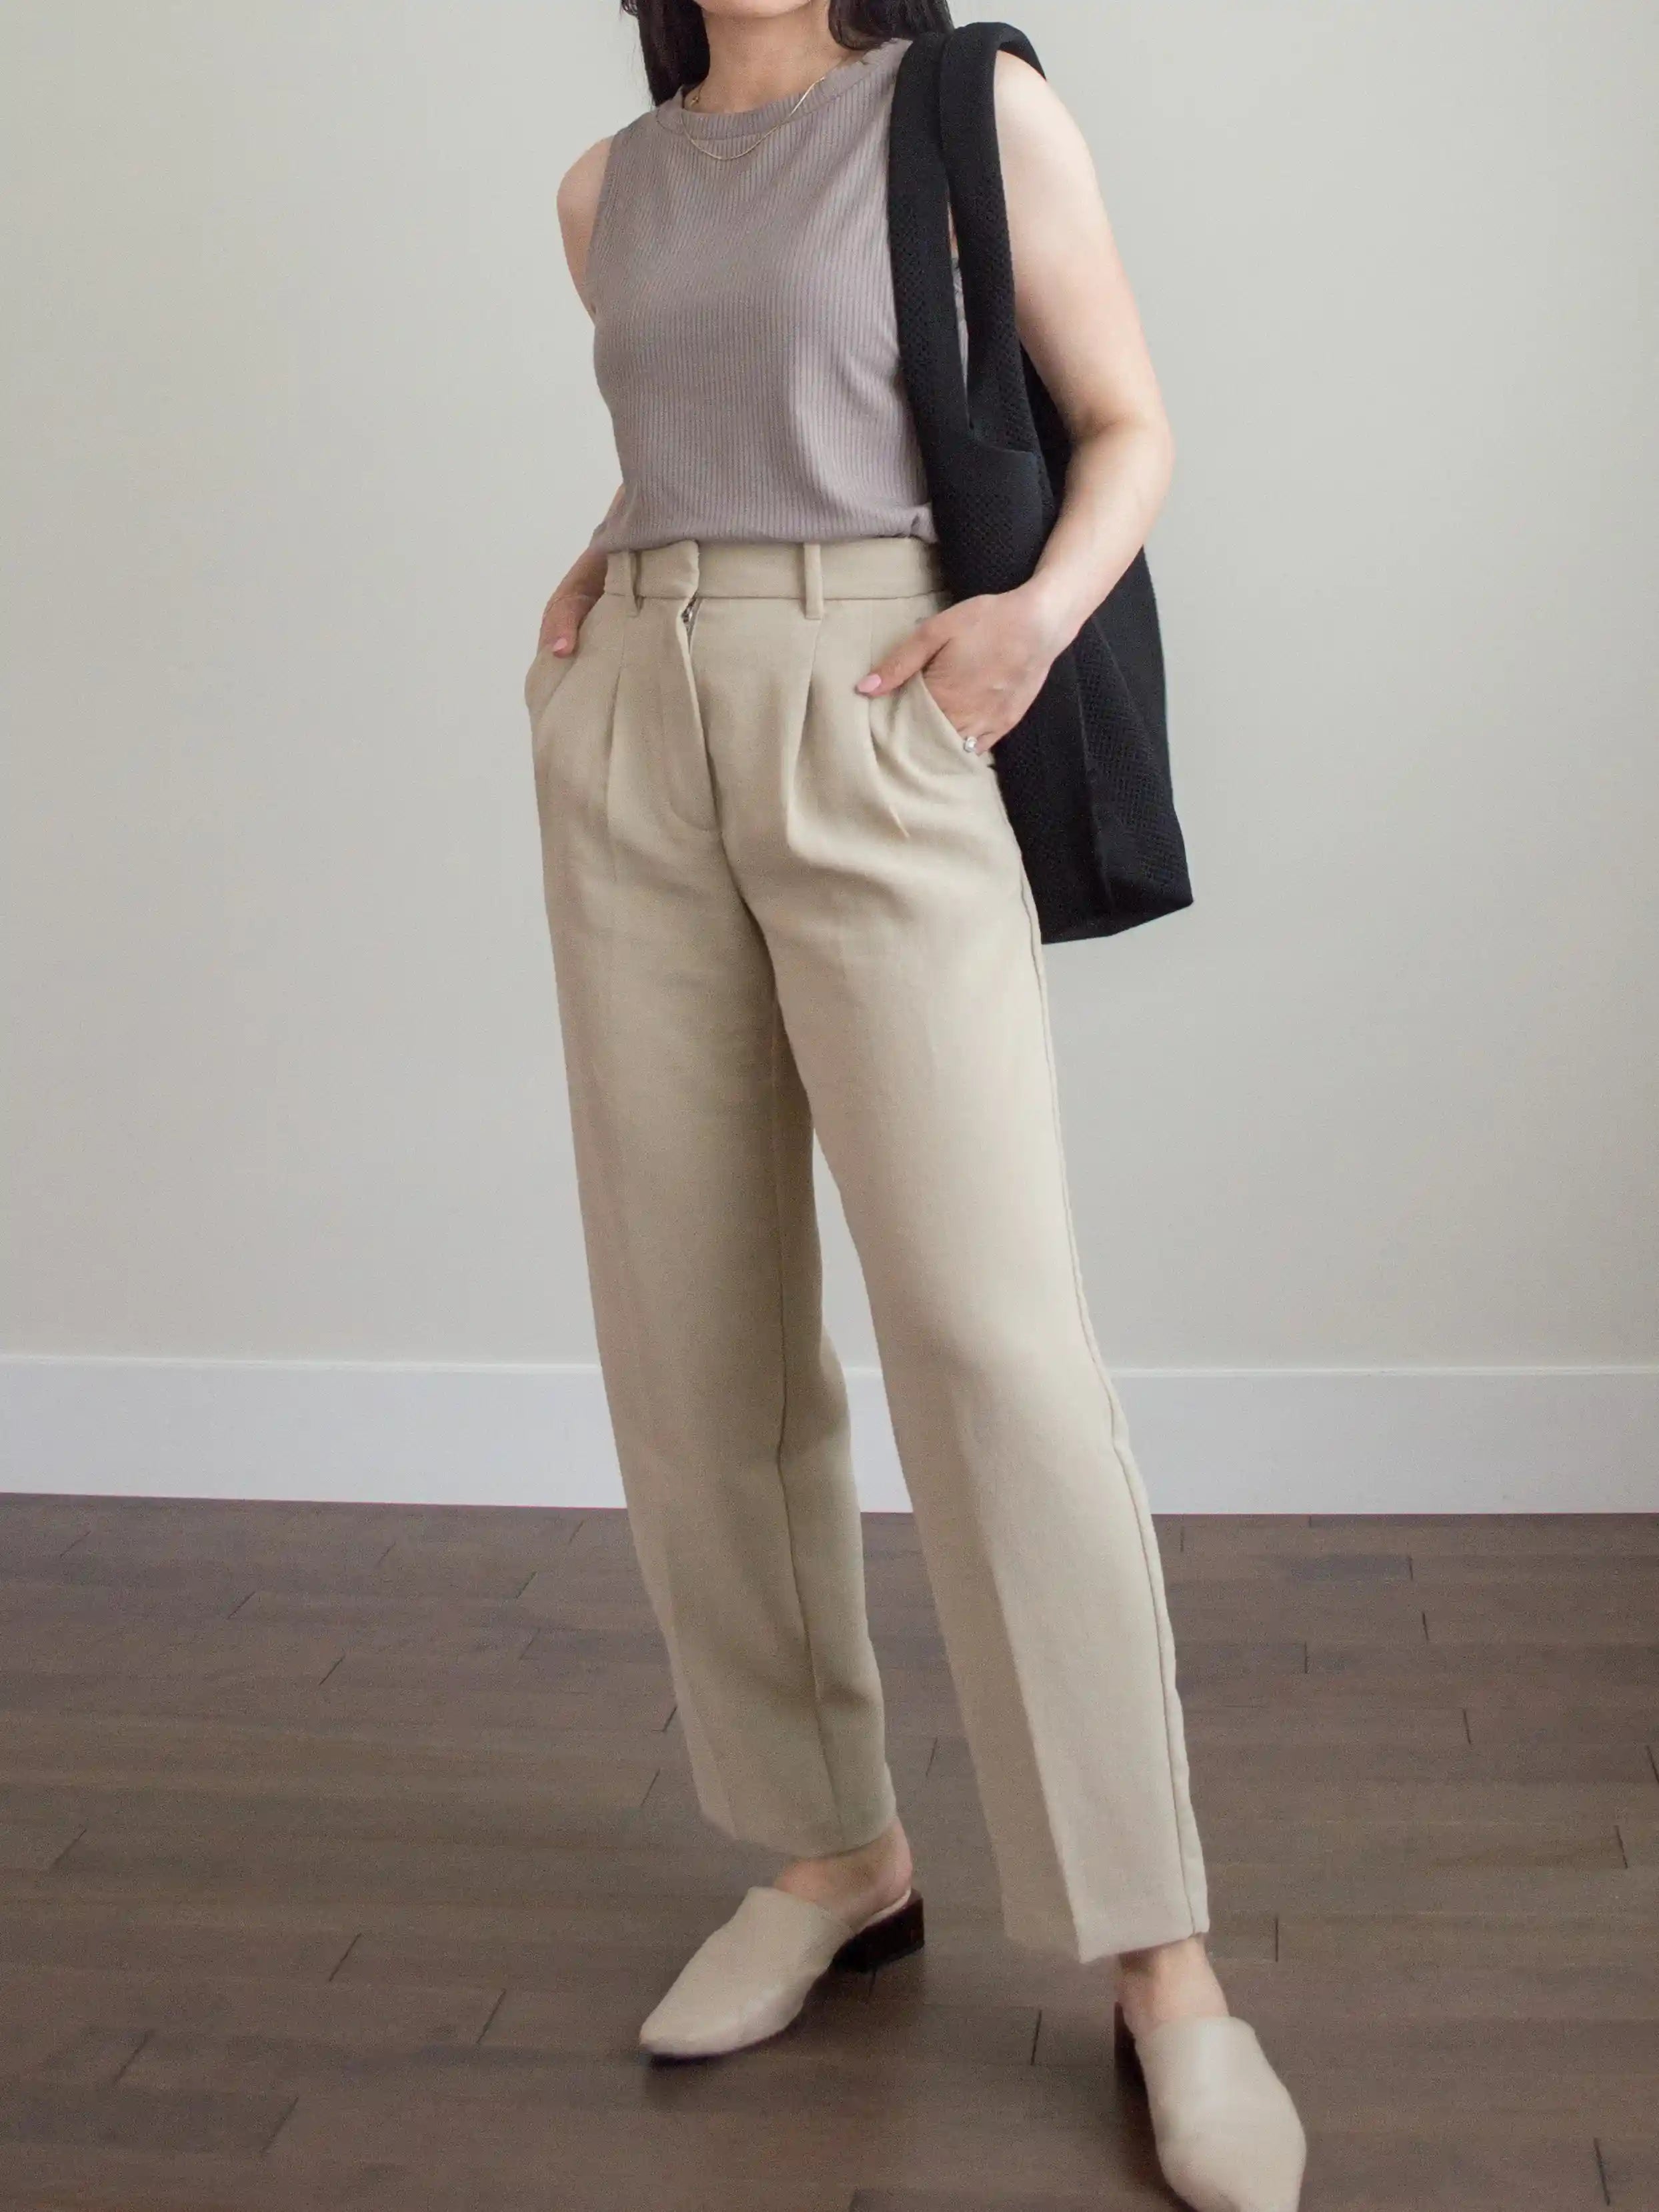 How Many Ways Are There to Style Women's Khaki Pants Outfits